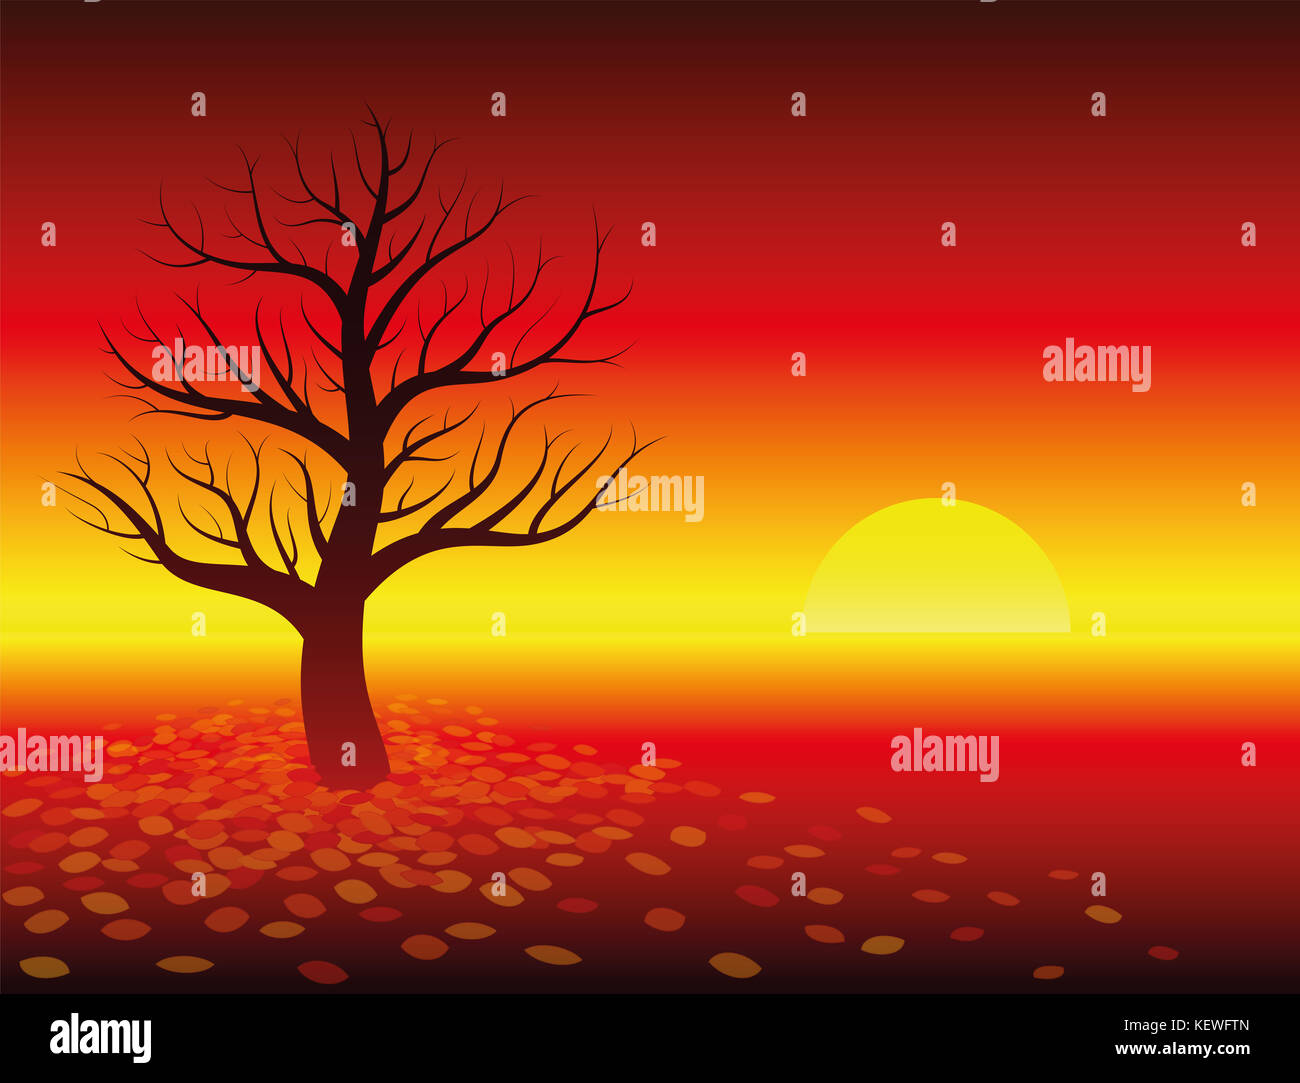 Autumn atmosphere - sunset in glowing red landscape with leafless tree. Illustration on warm red gradient background. Stock Photo